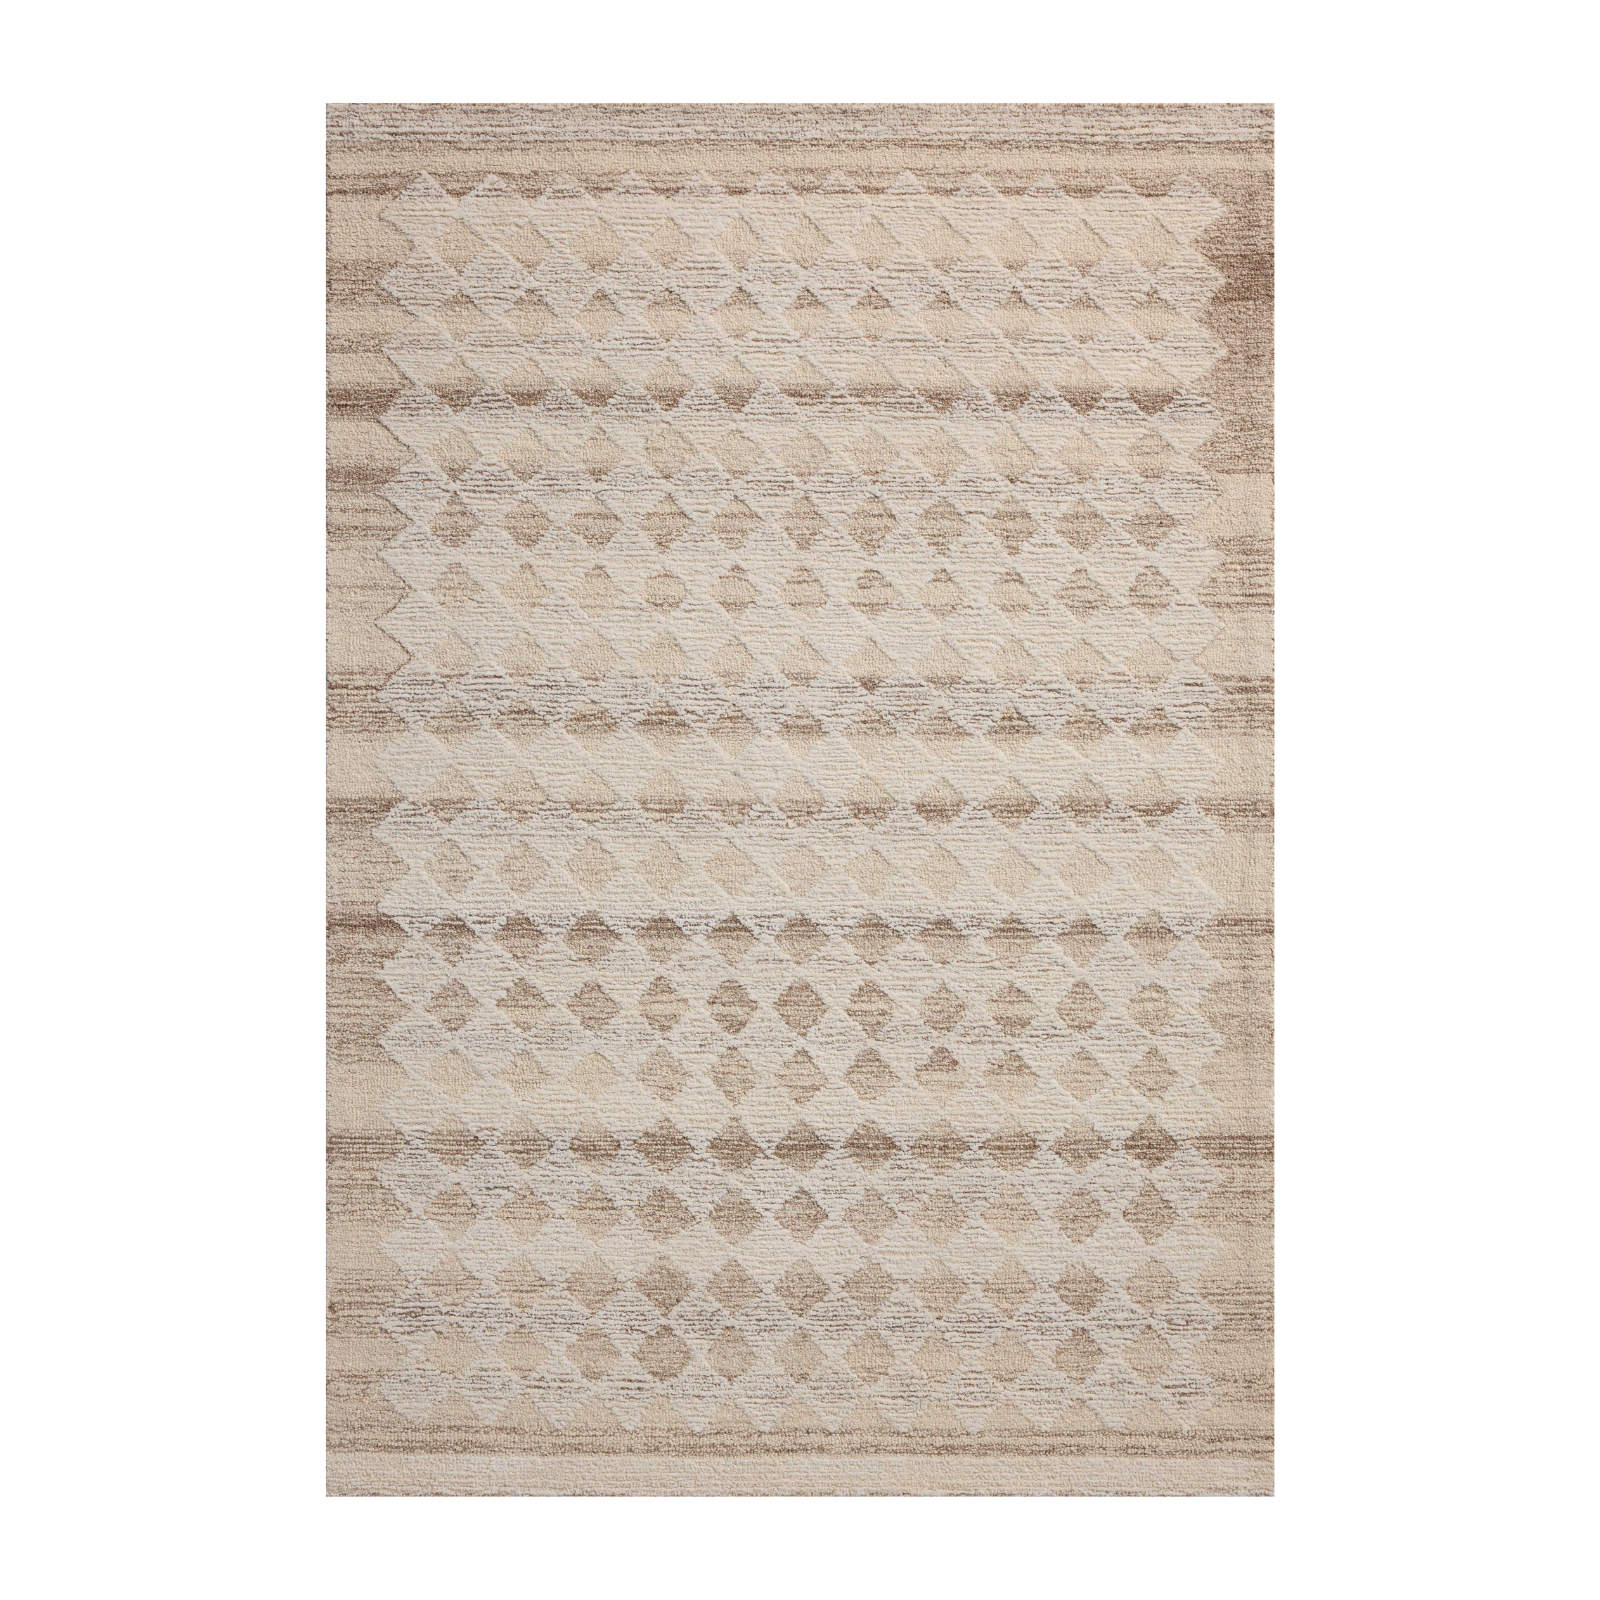 Magnolia Home by Joanna Gaines x Loloi Rae Natural / Ivory Rug